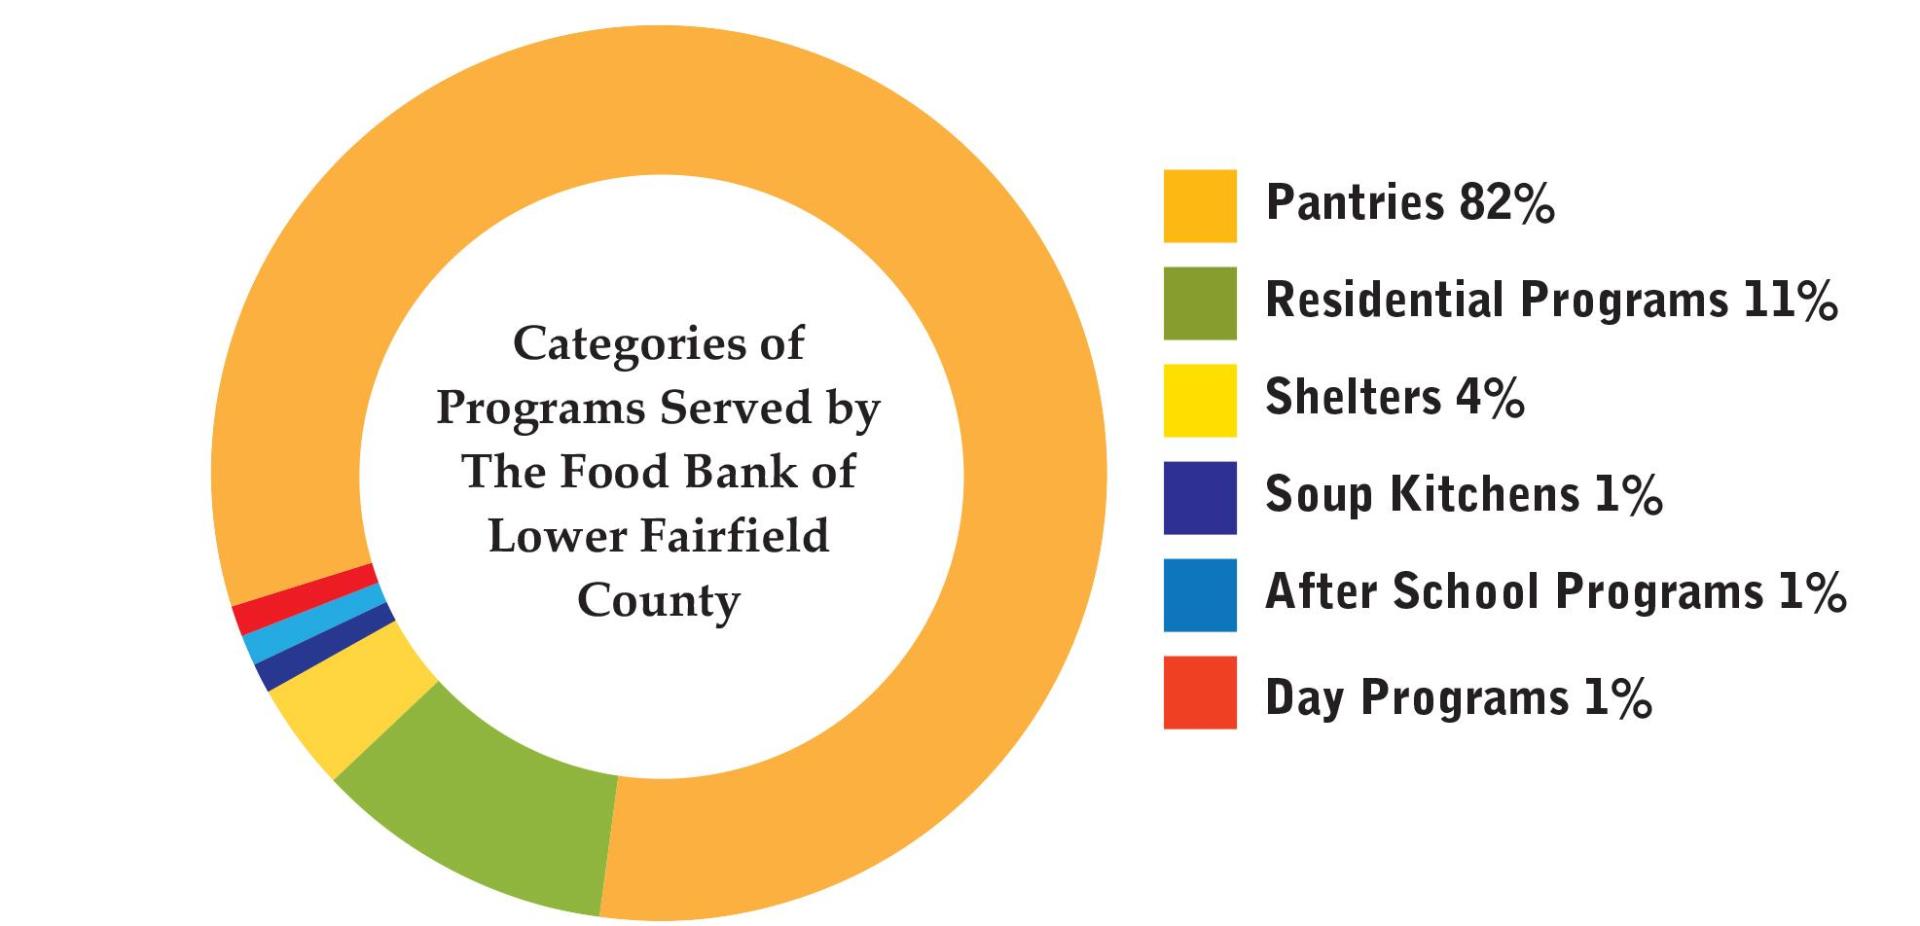 Pie chart of categories of programs serviced by The Food Bank